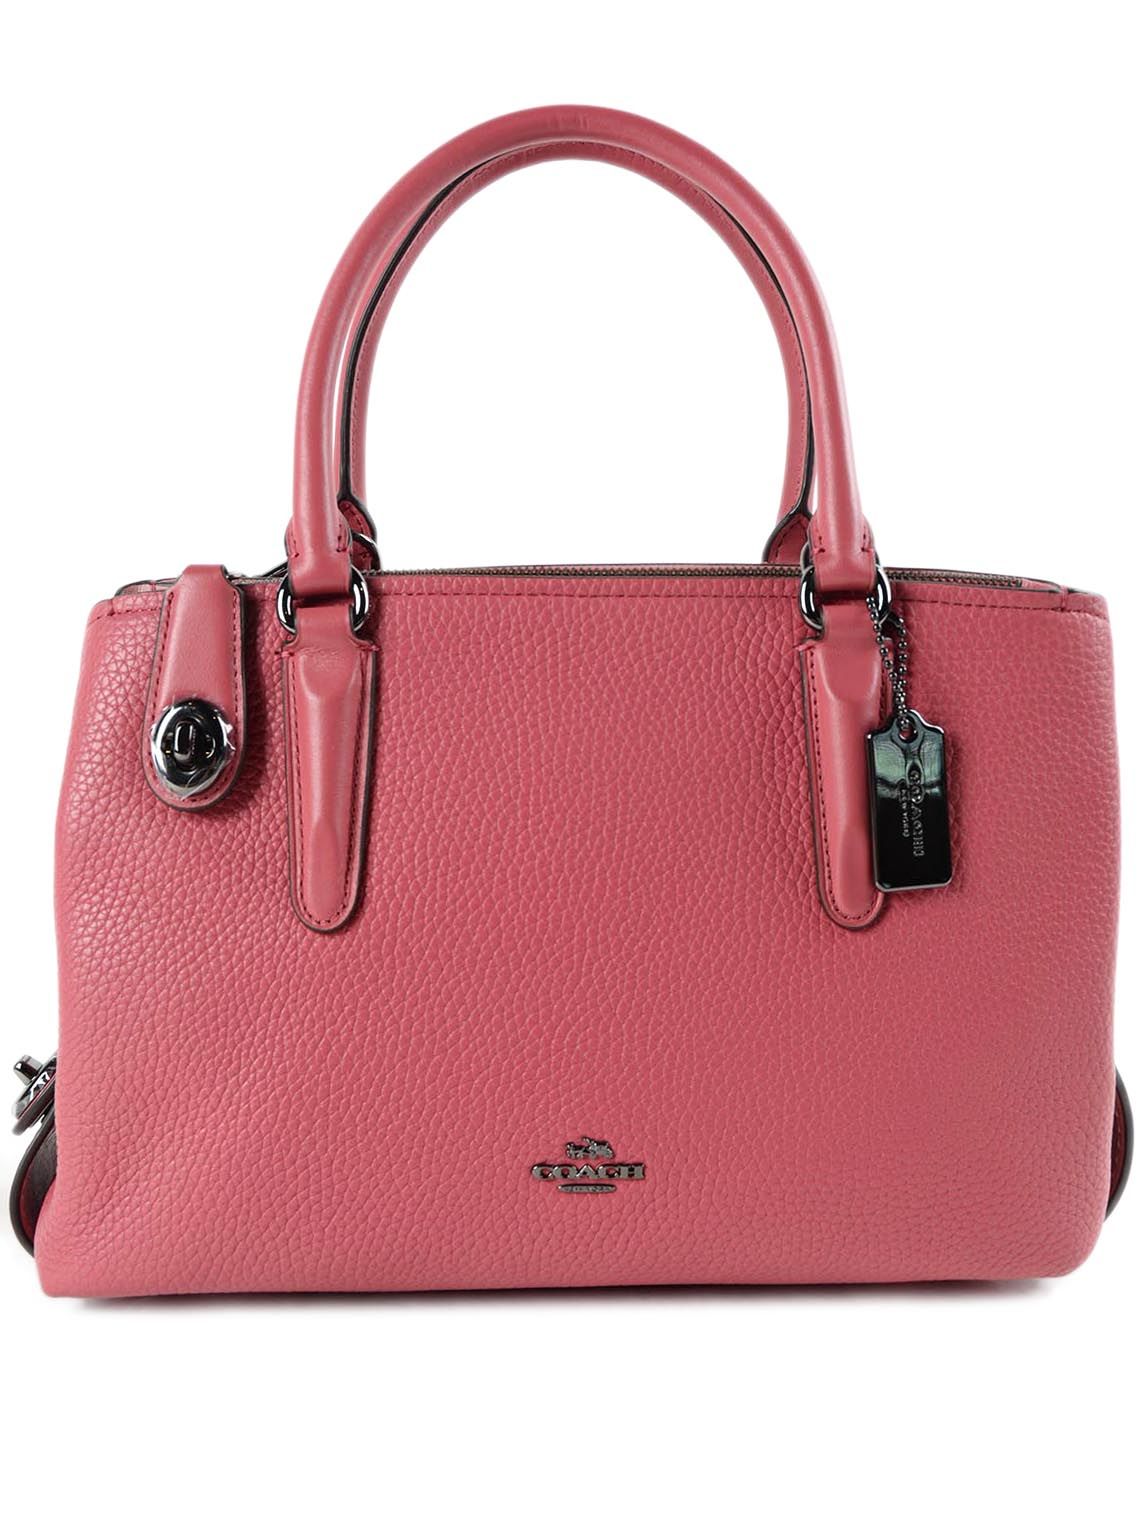 Coach - Coach Brooklyn 28 Carryall Tote - Pink & Purple, Women's Totes ...